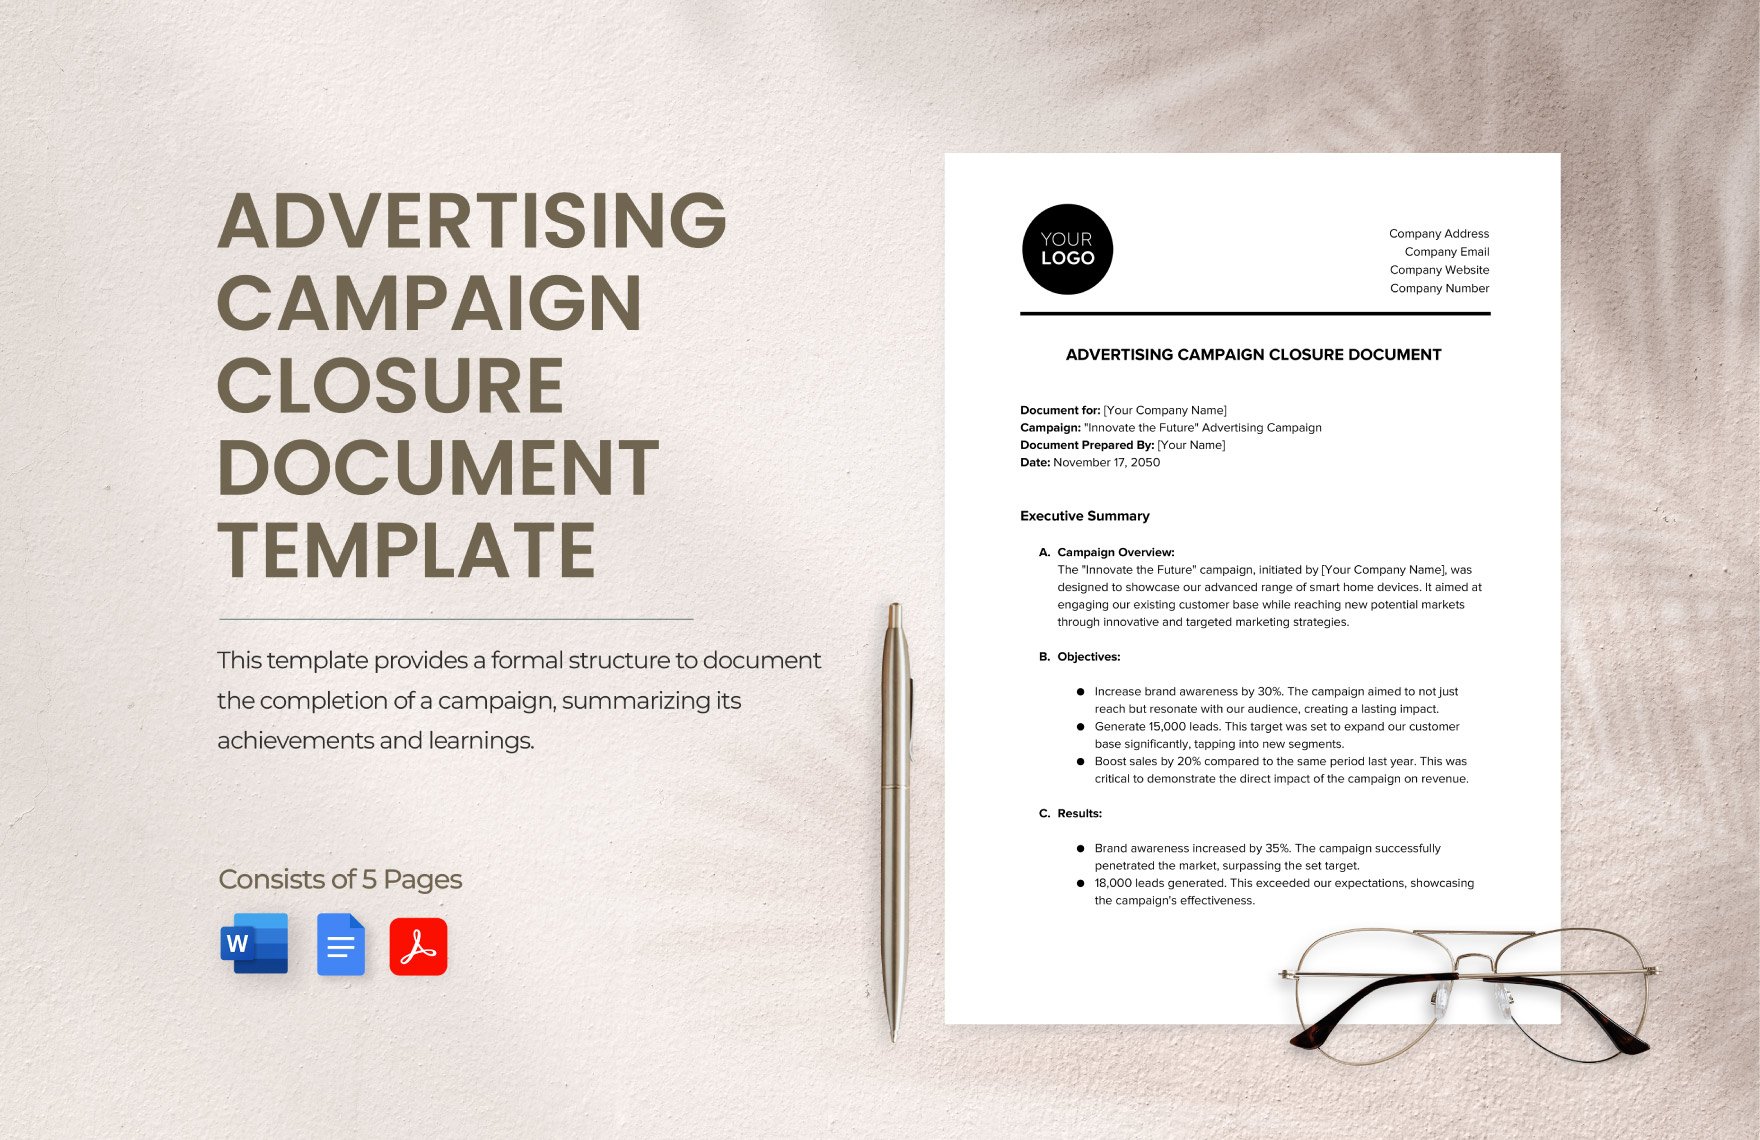 Advertising Campaign Closure Document Template in Word, Google Docs, PDF